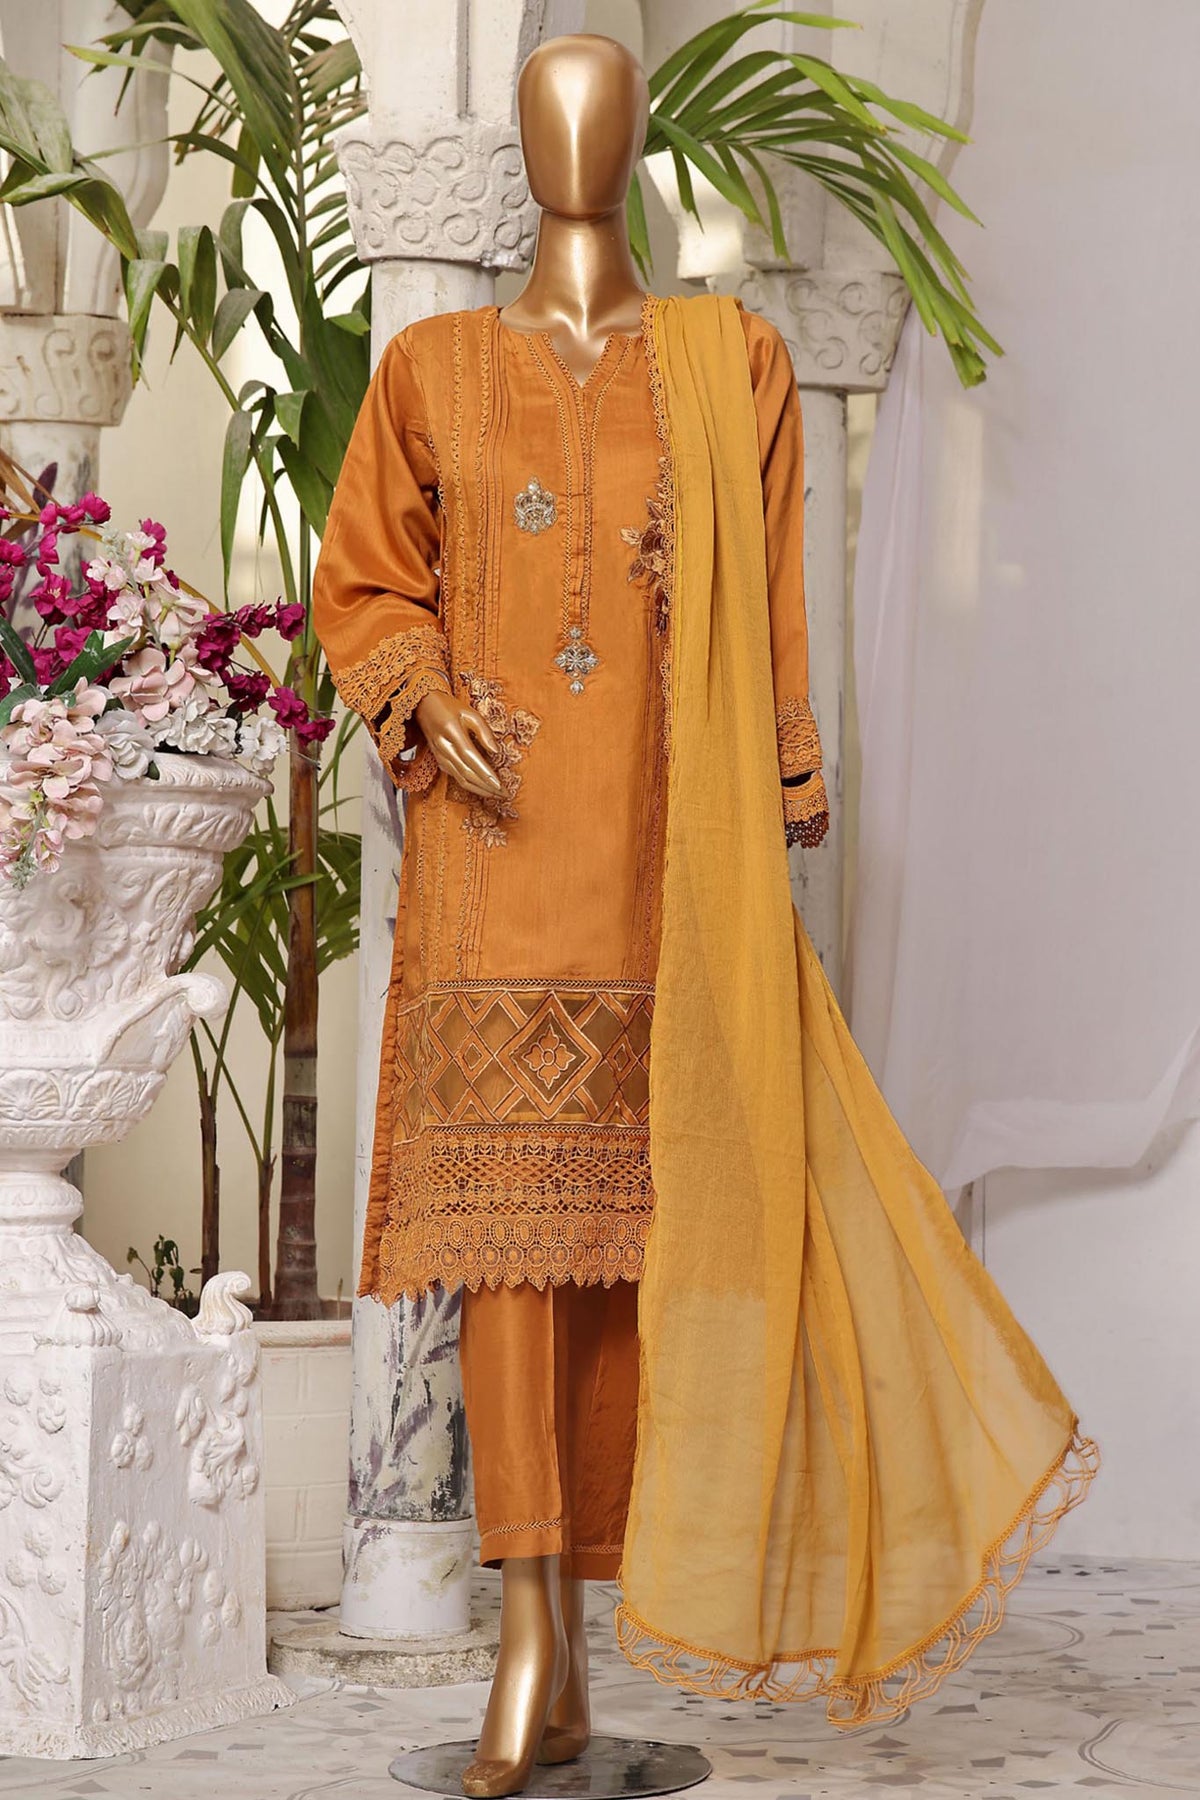 01-VCK-Golden | 3PC Stitched Luxury Viscose Lawn Rania By Sada Bahar